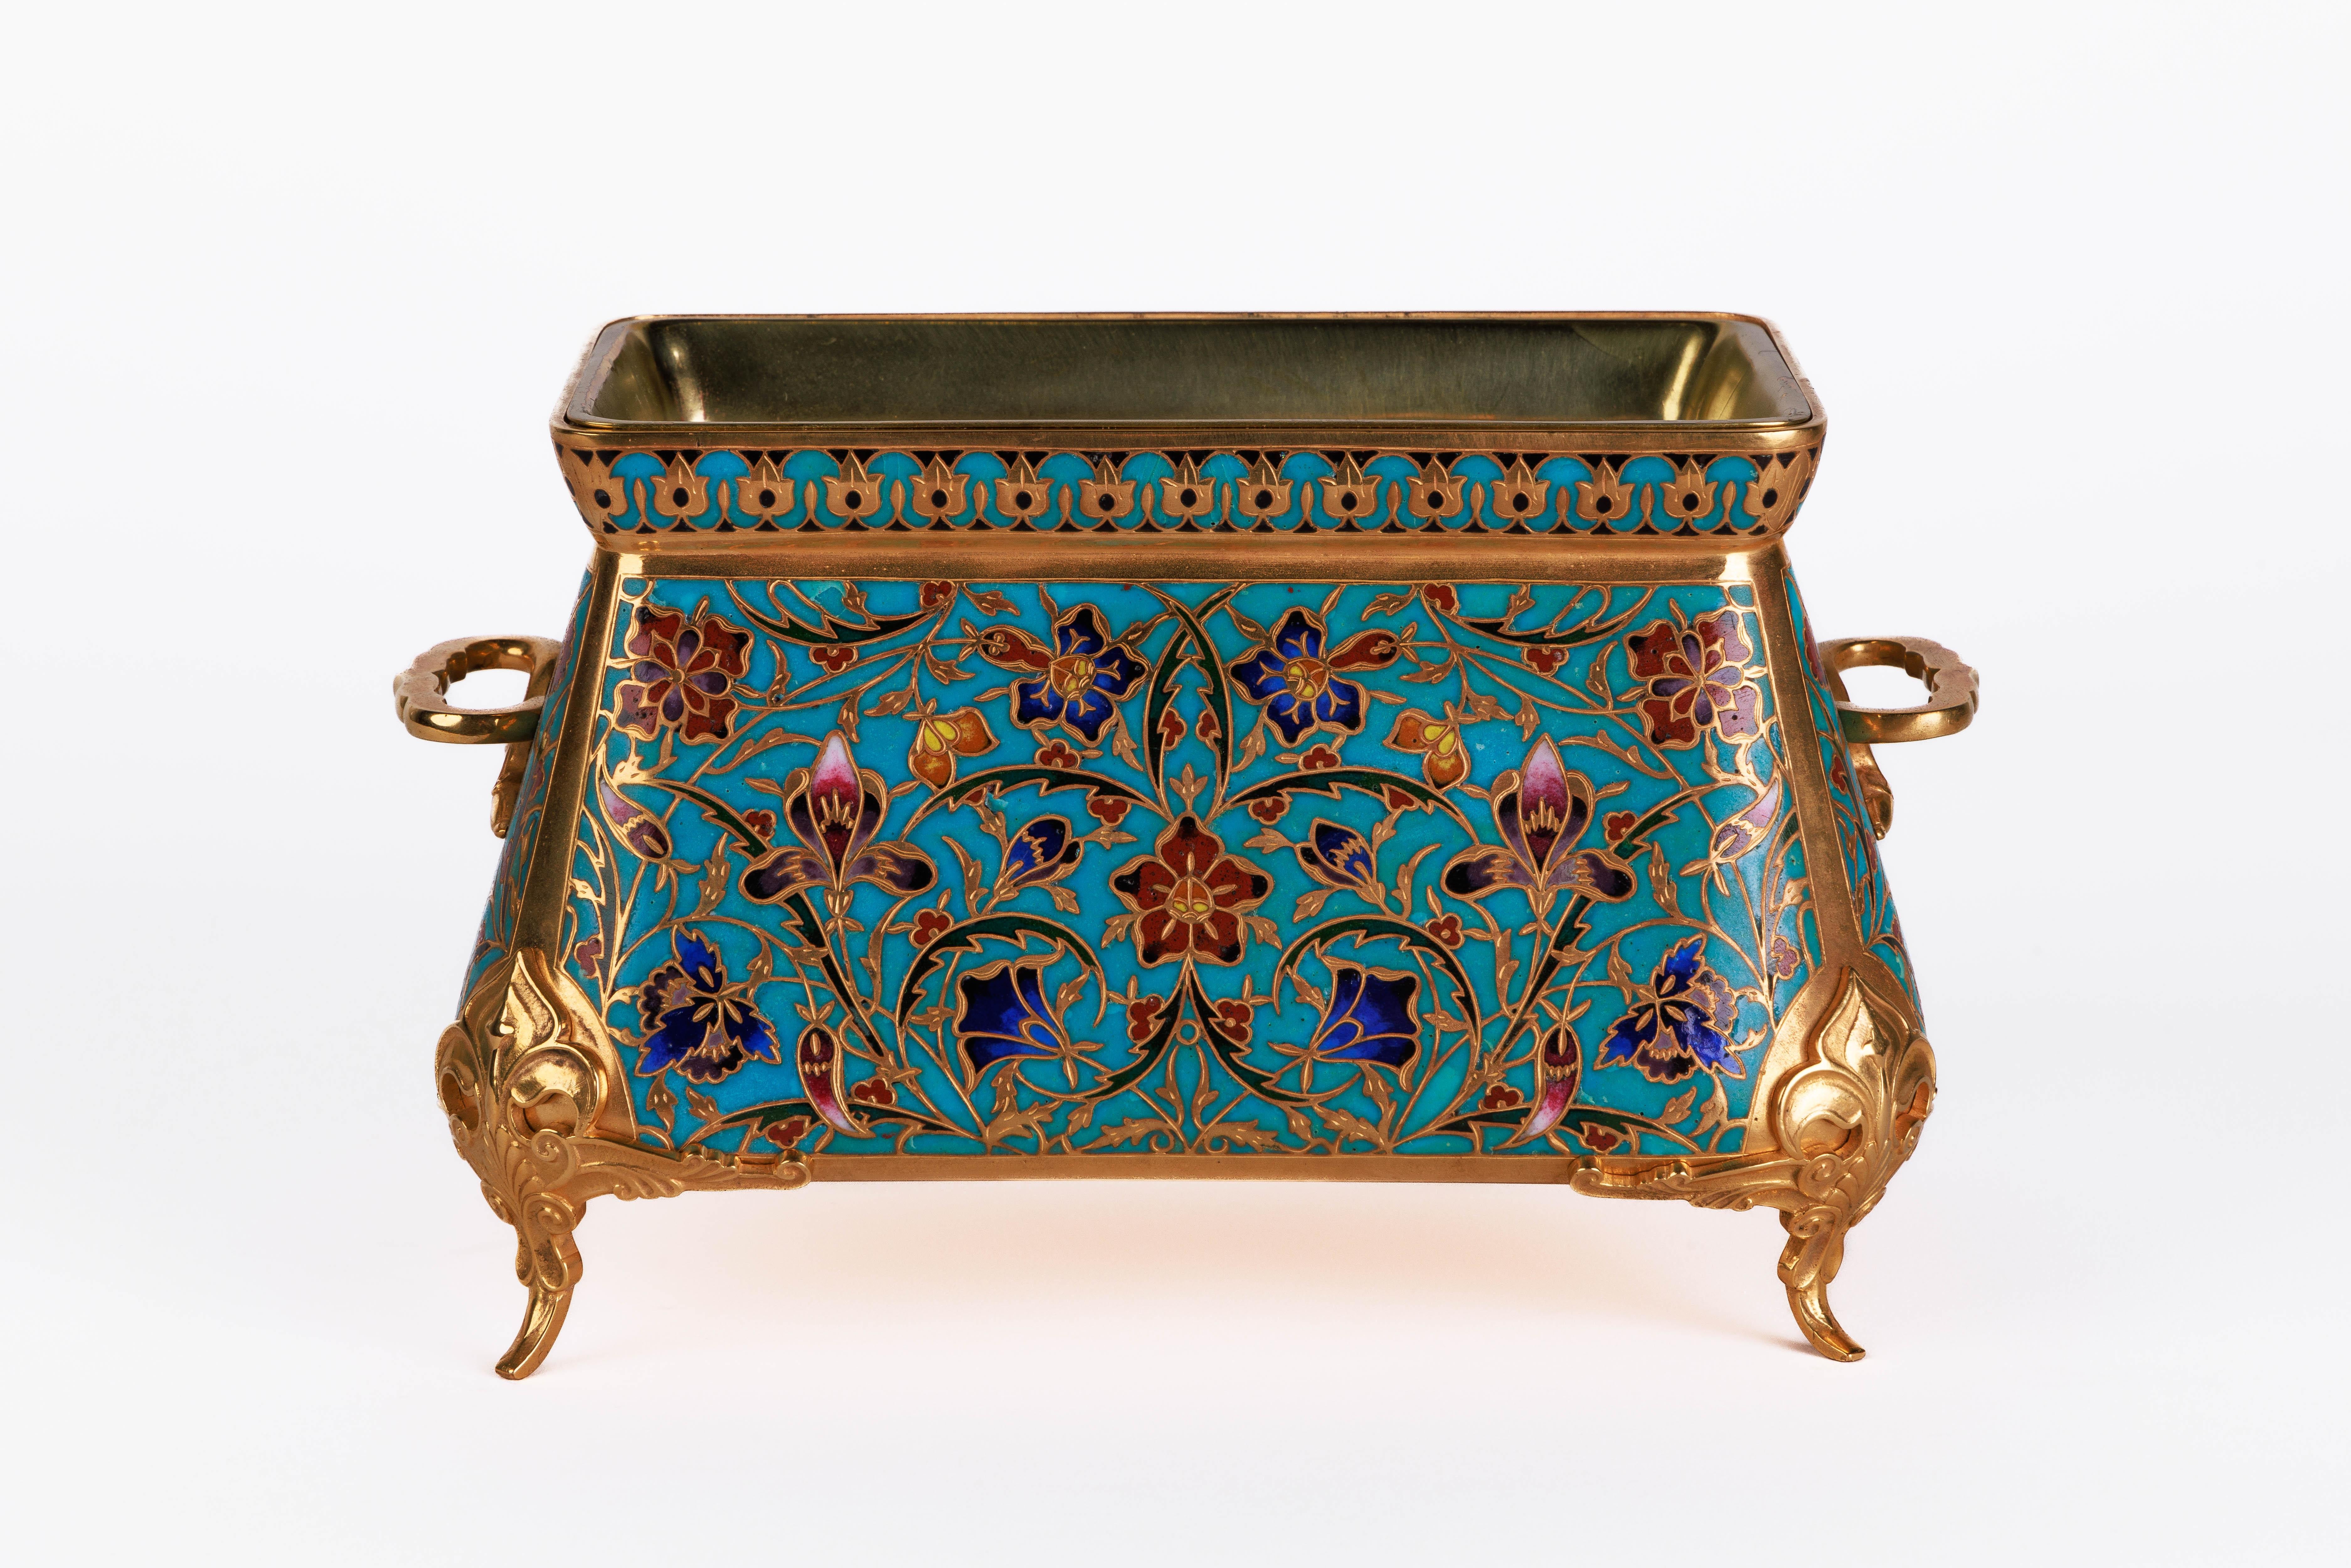 Ferdinand Barbedienne, An Exquisite Suite of Three French Ormolu and Champleve Enamel Jardinieres / Garniture C. 1870, The Design Attributed to Louis Constant Sevin.

Comprising of three exceptional quality turquoise and yellow-ground champlevé